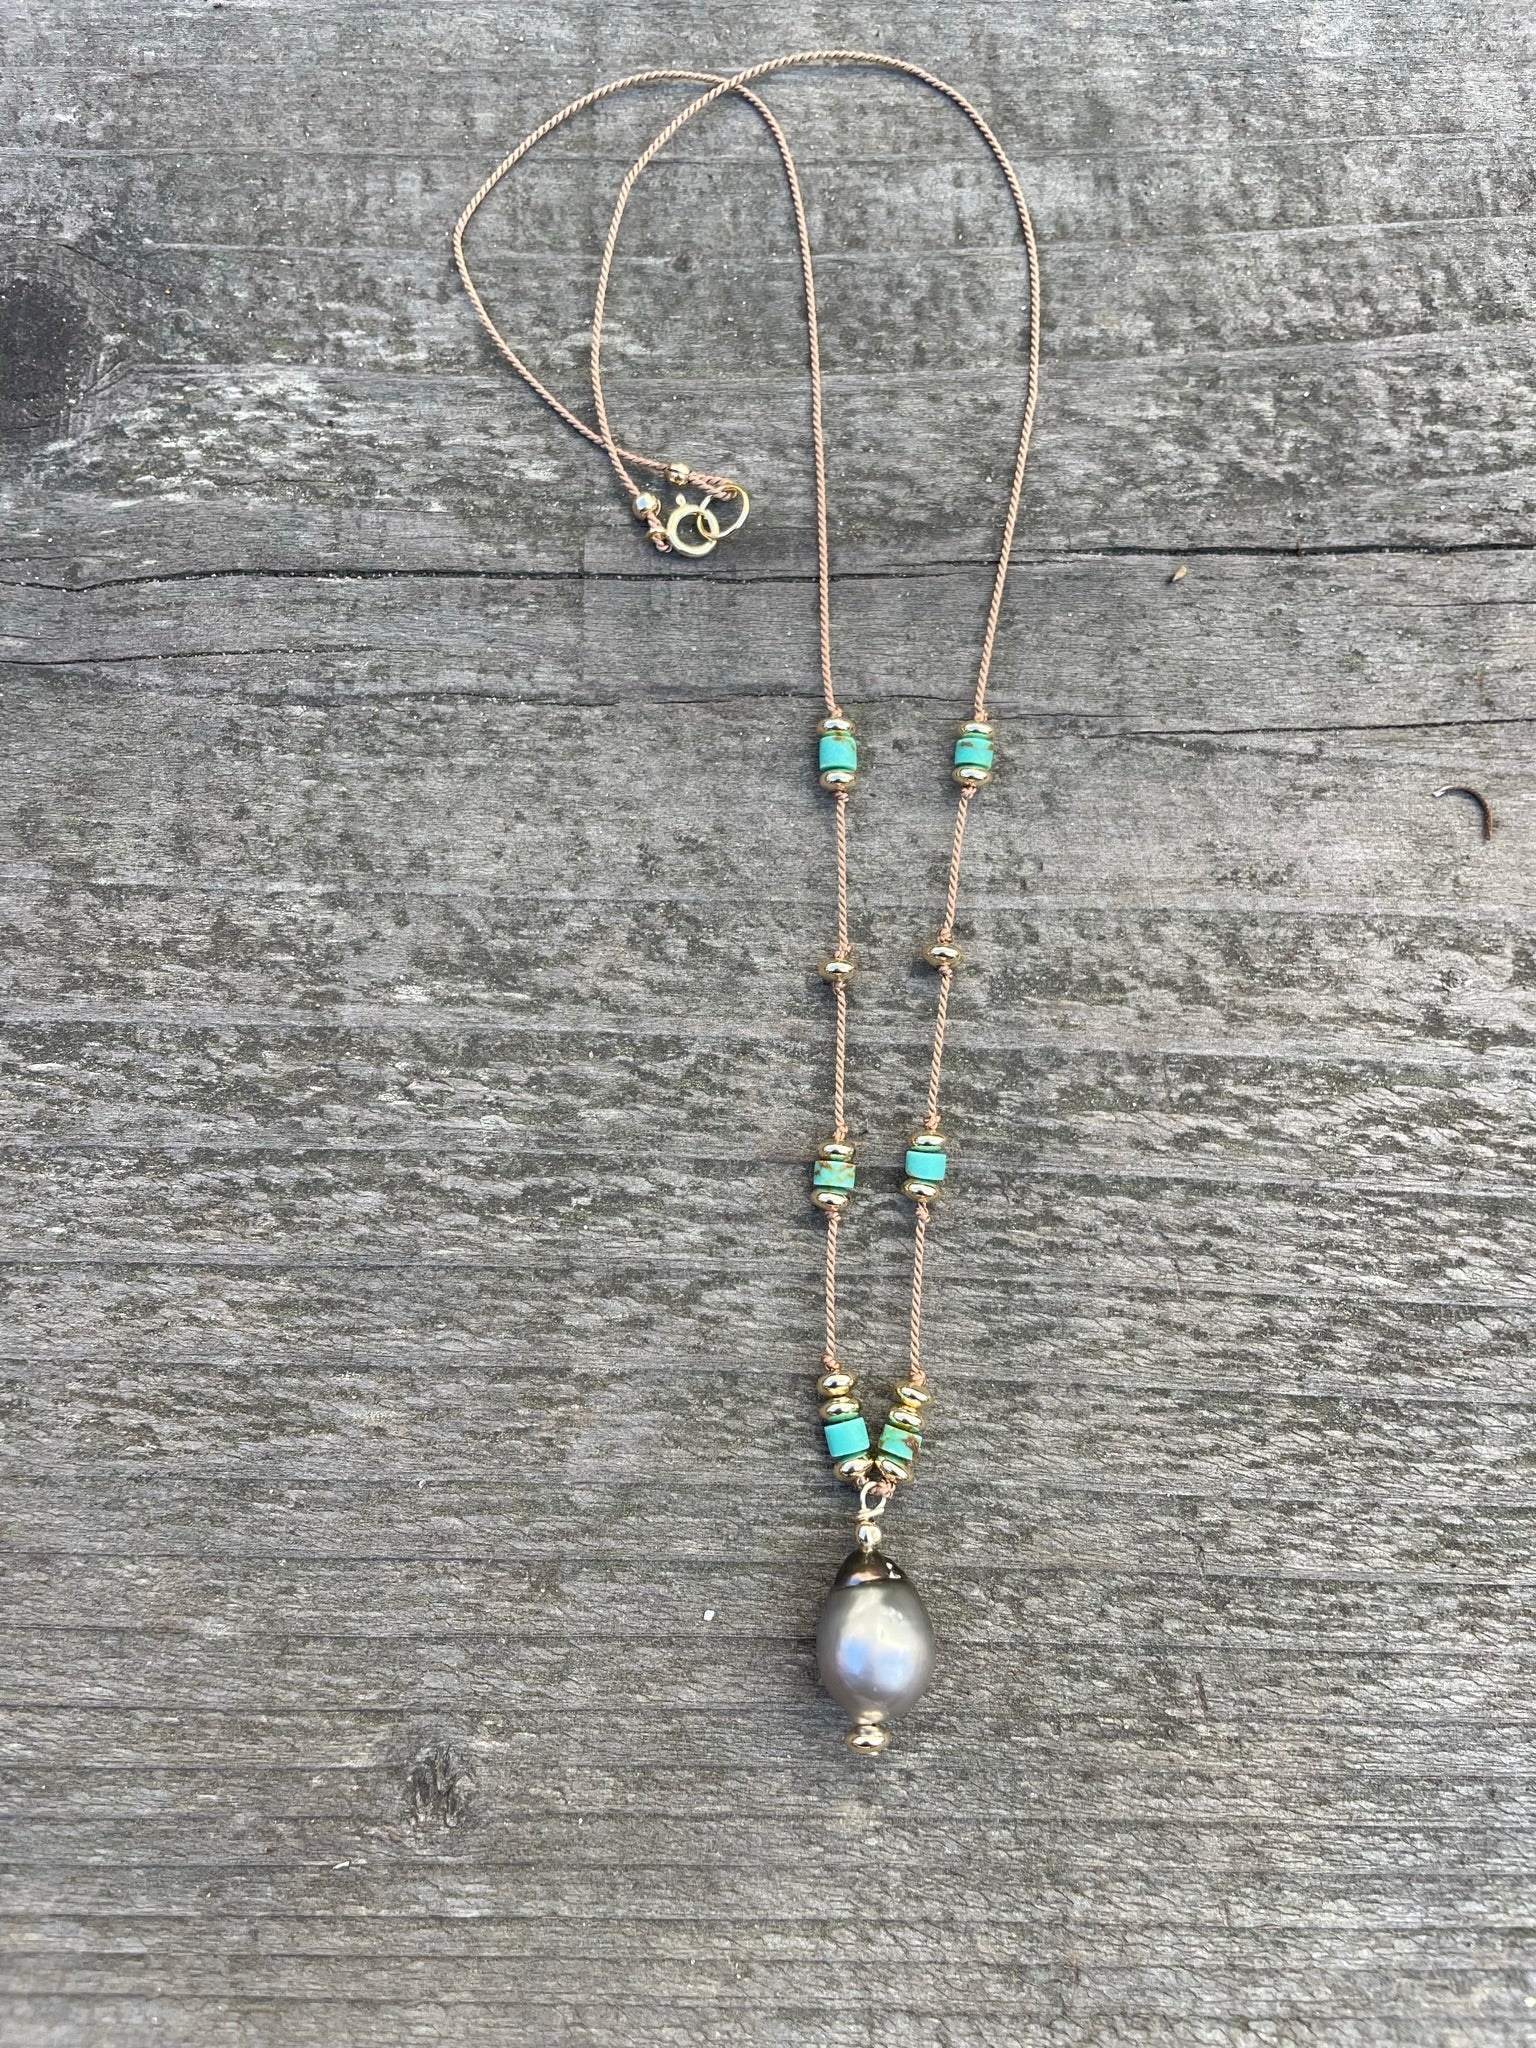 a necklace with turquoise and gold beads and a center pendant of a tahtian black pearl sit on a wooden background